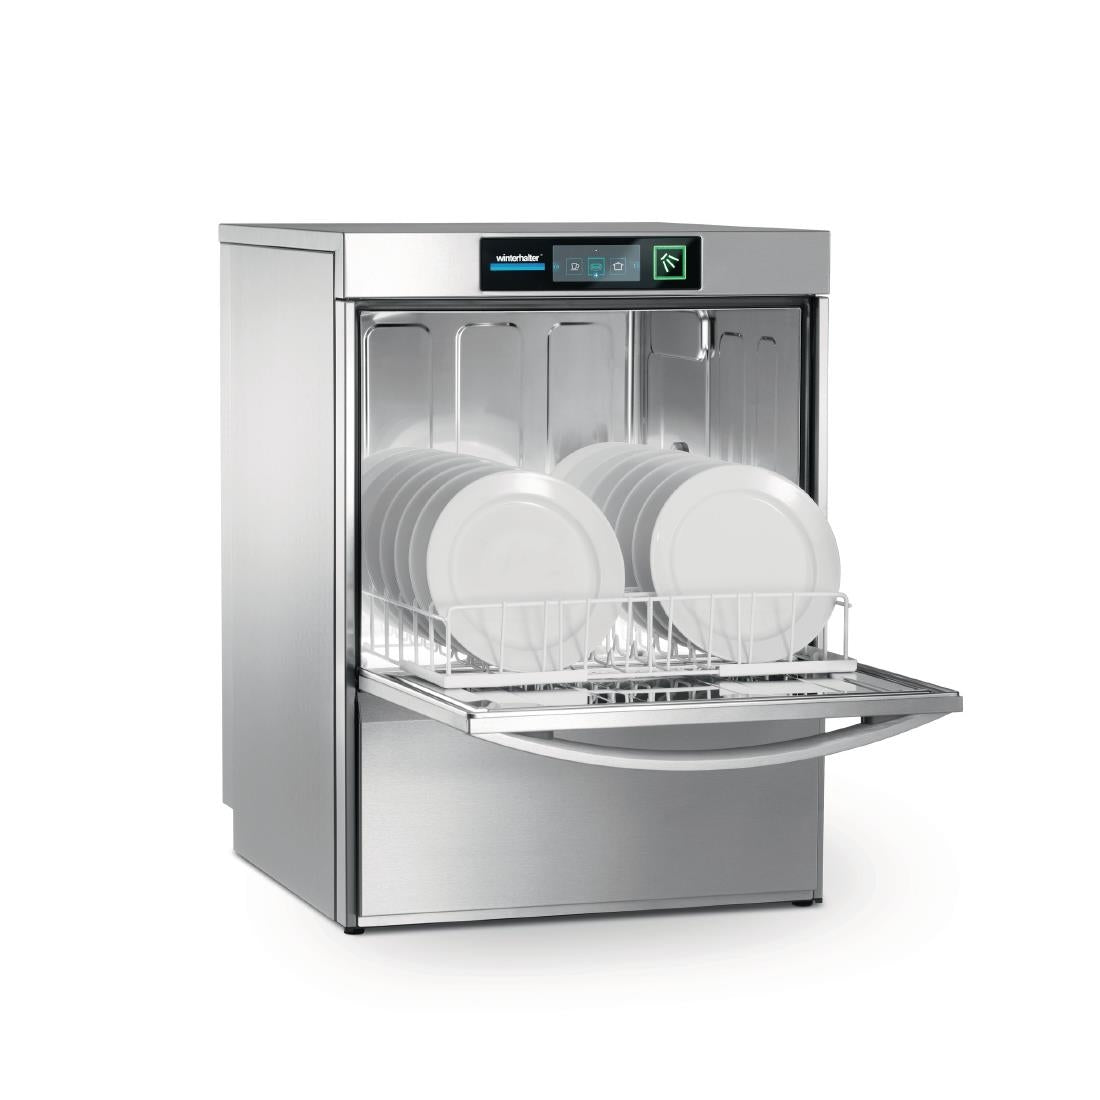 FD302 Winterhalter Undercounter Thermal Disinfection Dishwasher UC-L-E JD Catering Equipment Solutions Ltd